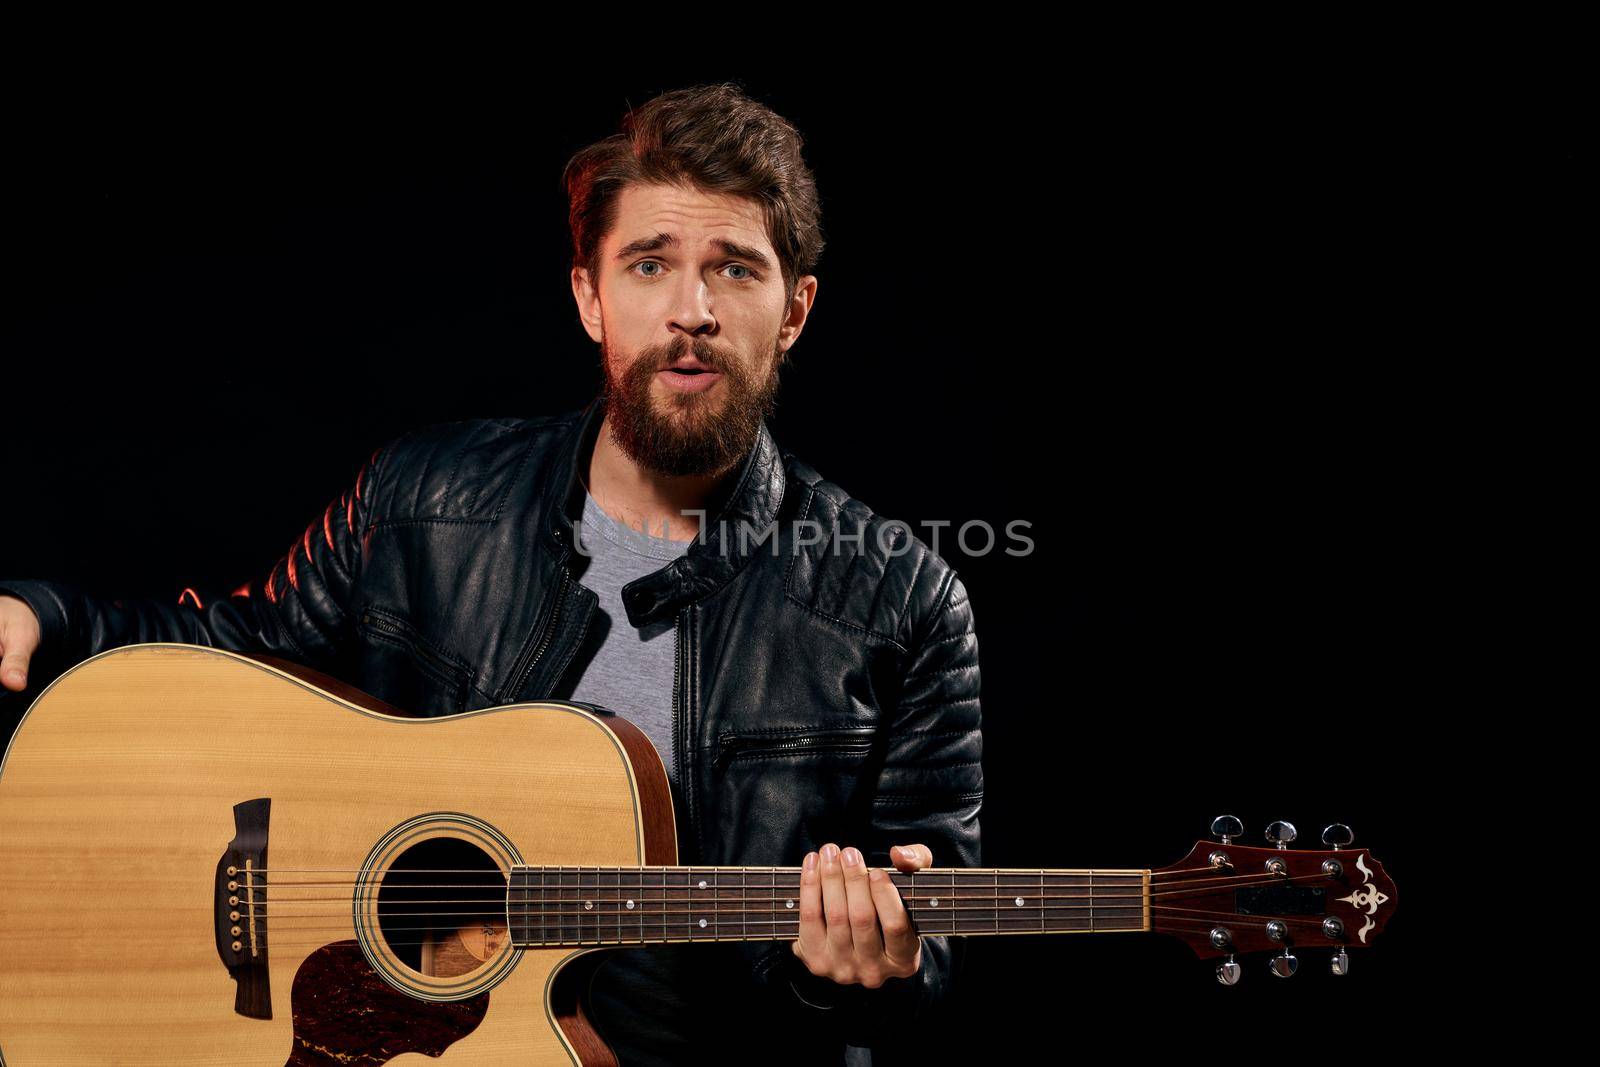 A man with a guitar in his hands leather jacket music performance rock star modern style dark background by SHOTPRIME